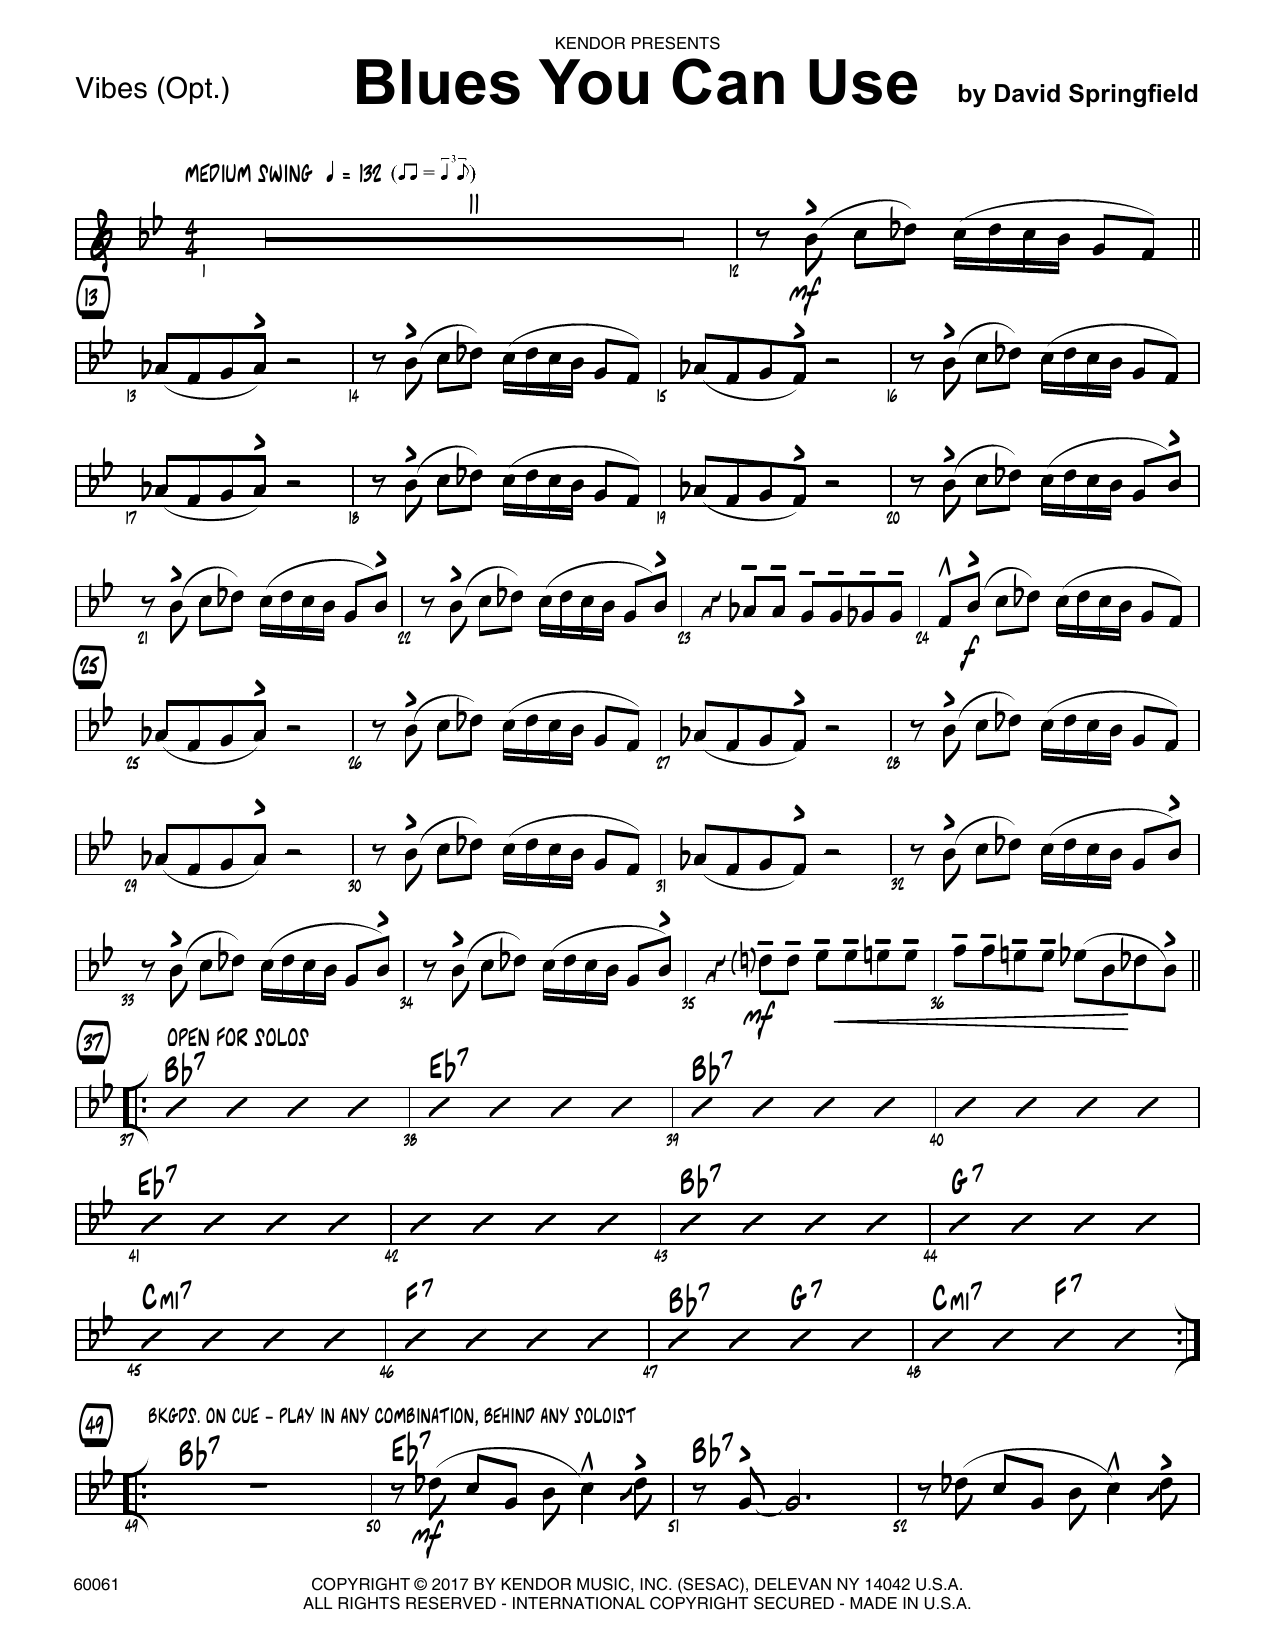 Download David Springfield Blues You Can Use - Vibes Sheet Music